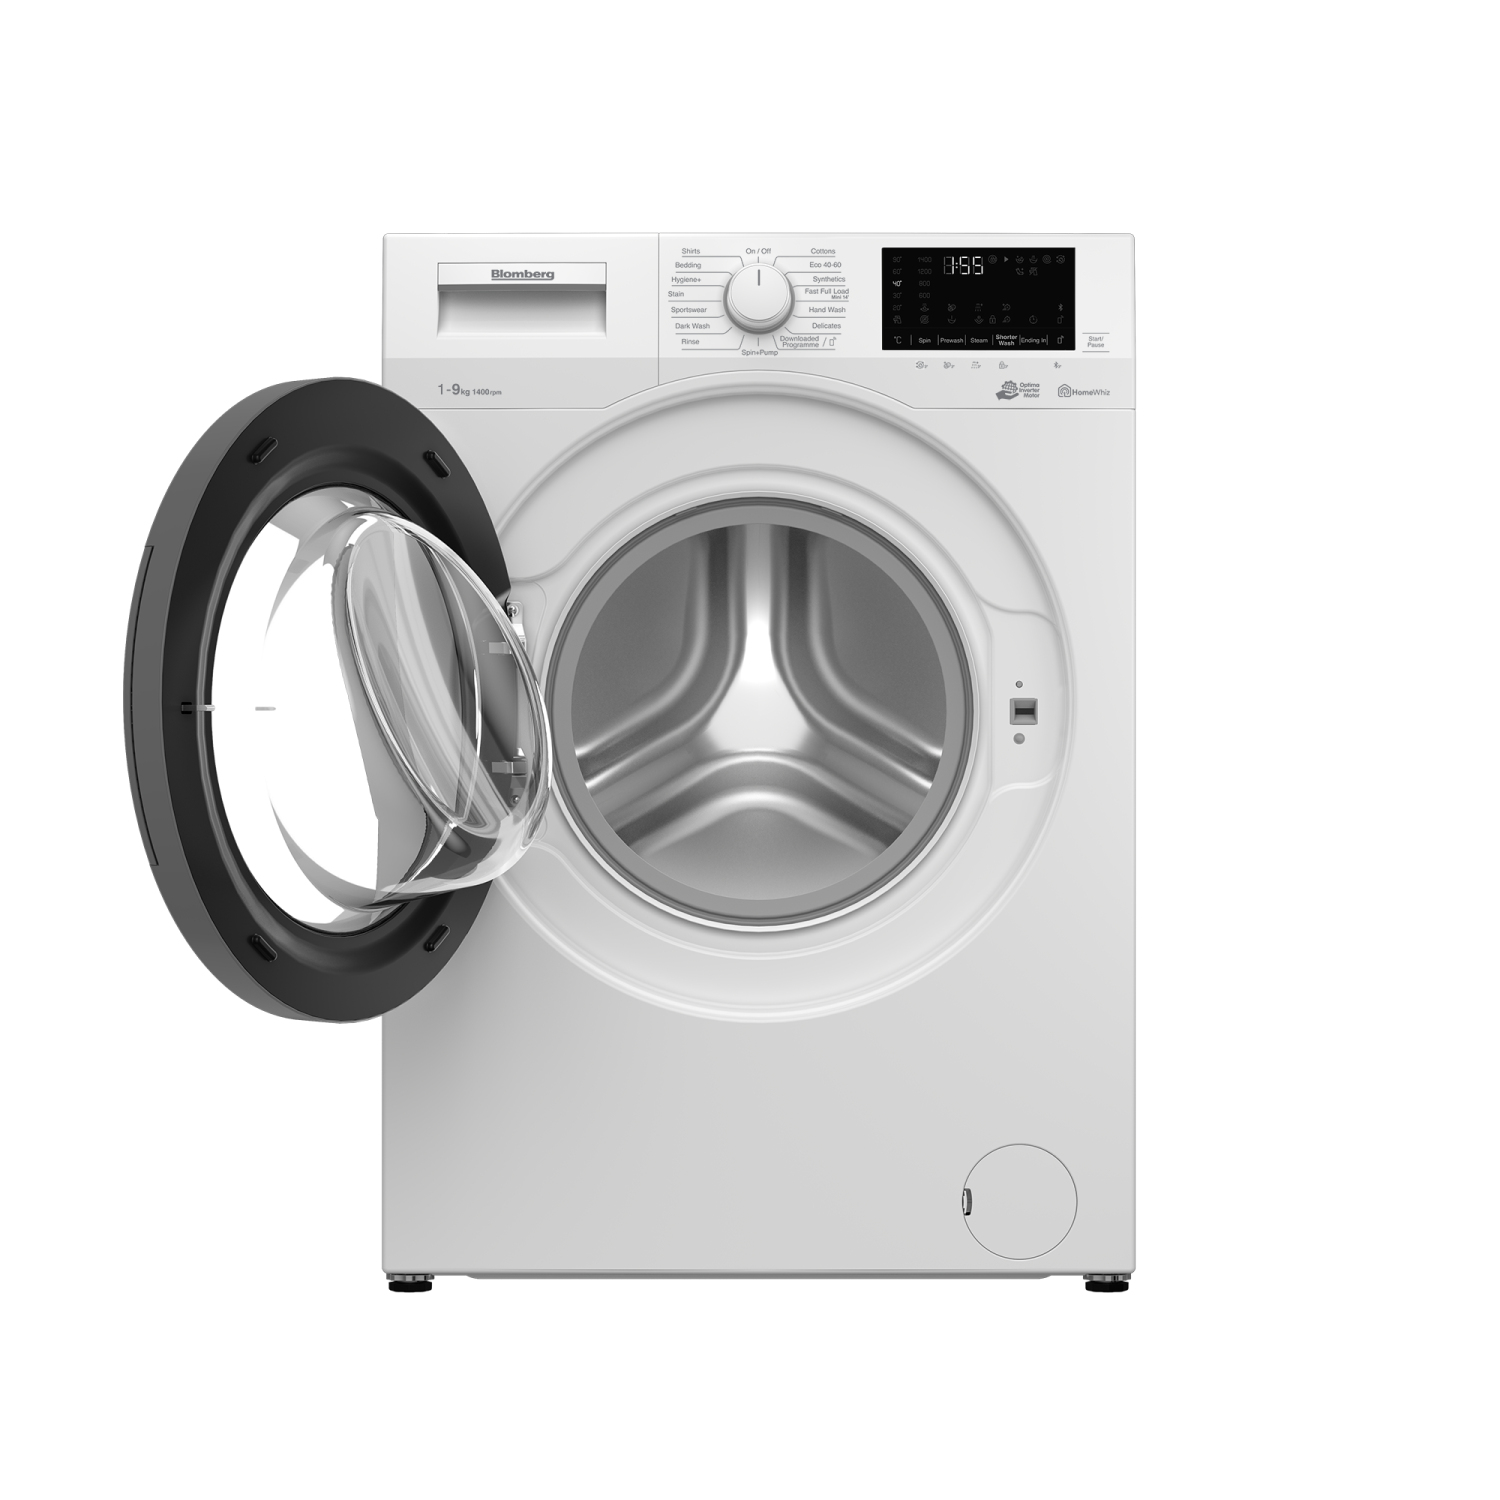 Blomberg LWF194410W 9kg 1400 Spin Washing Machine with Bluetooth Connection - White - 1